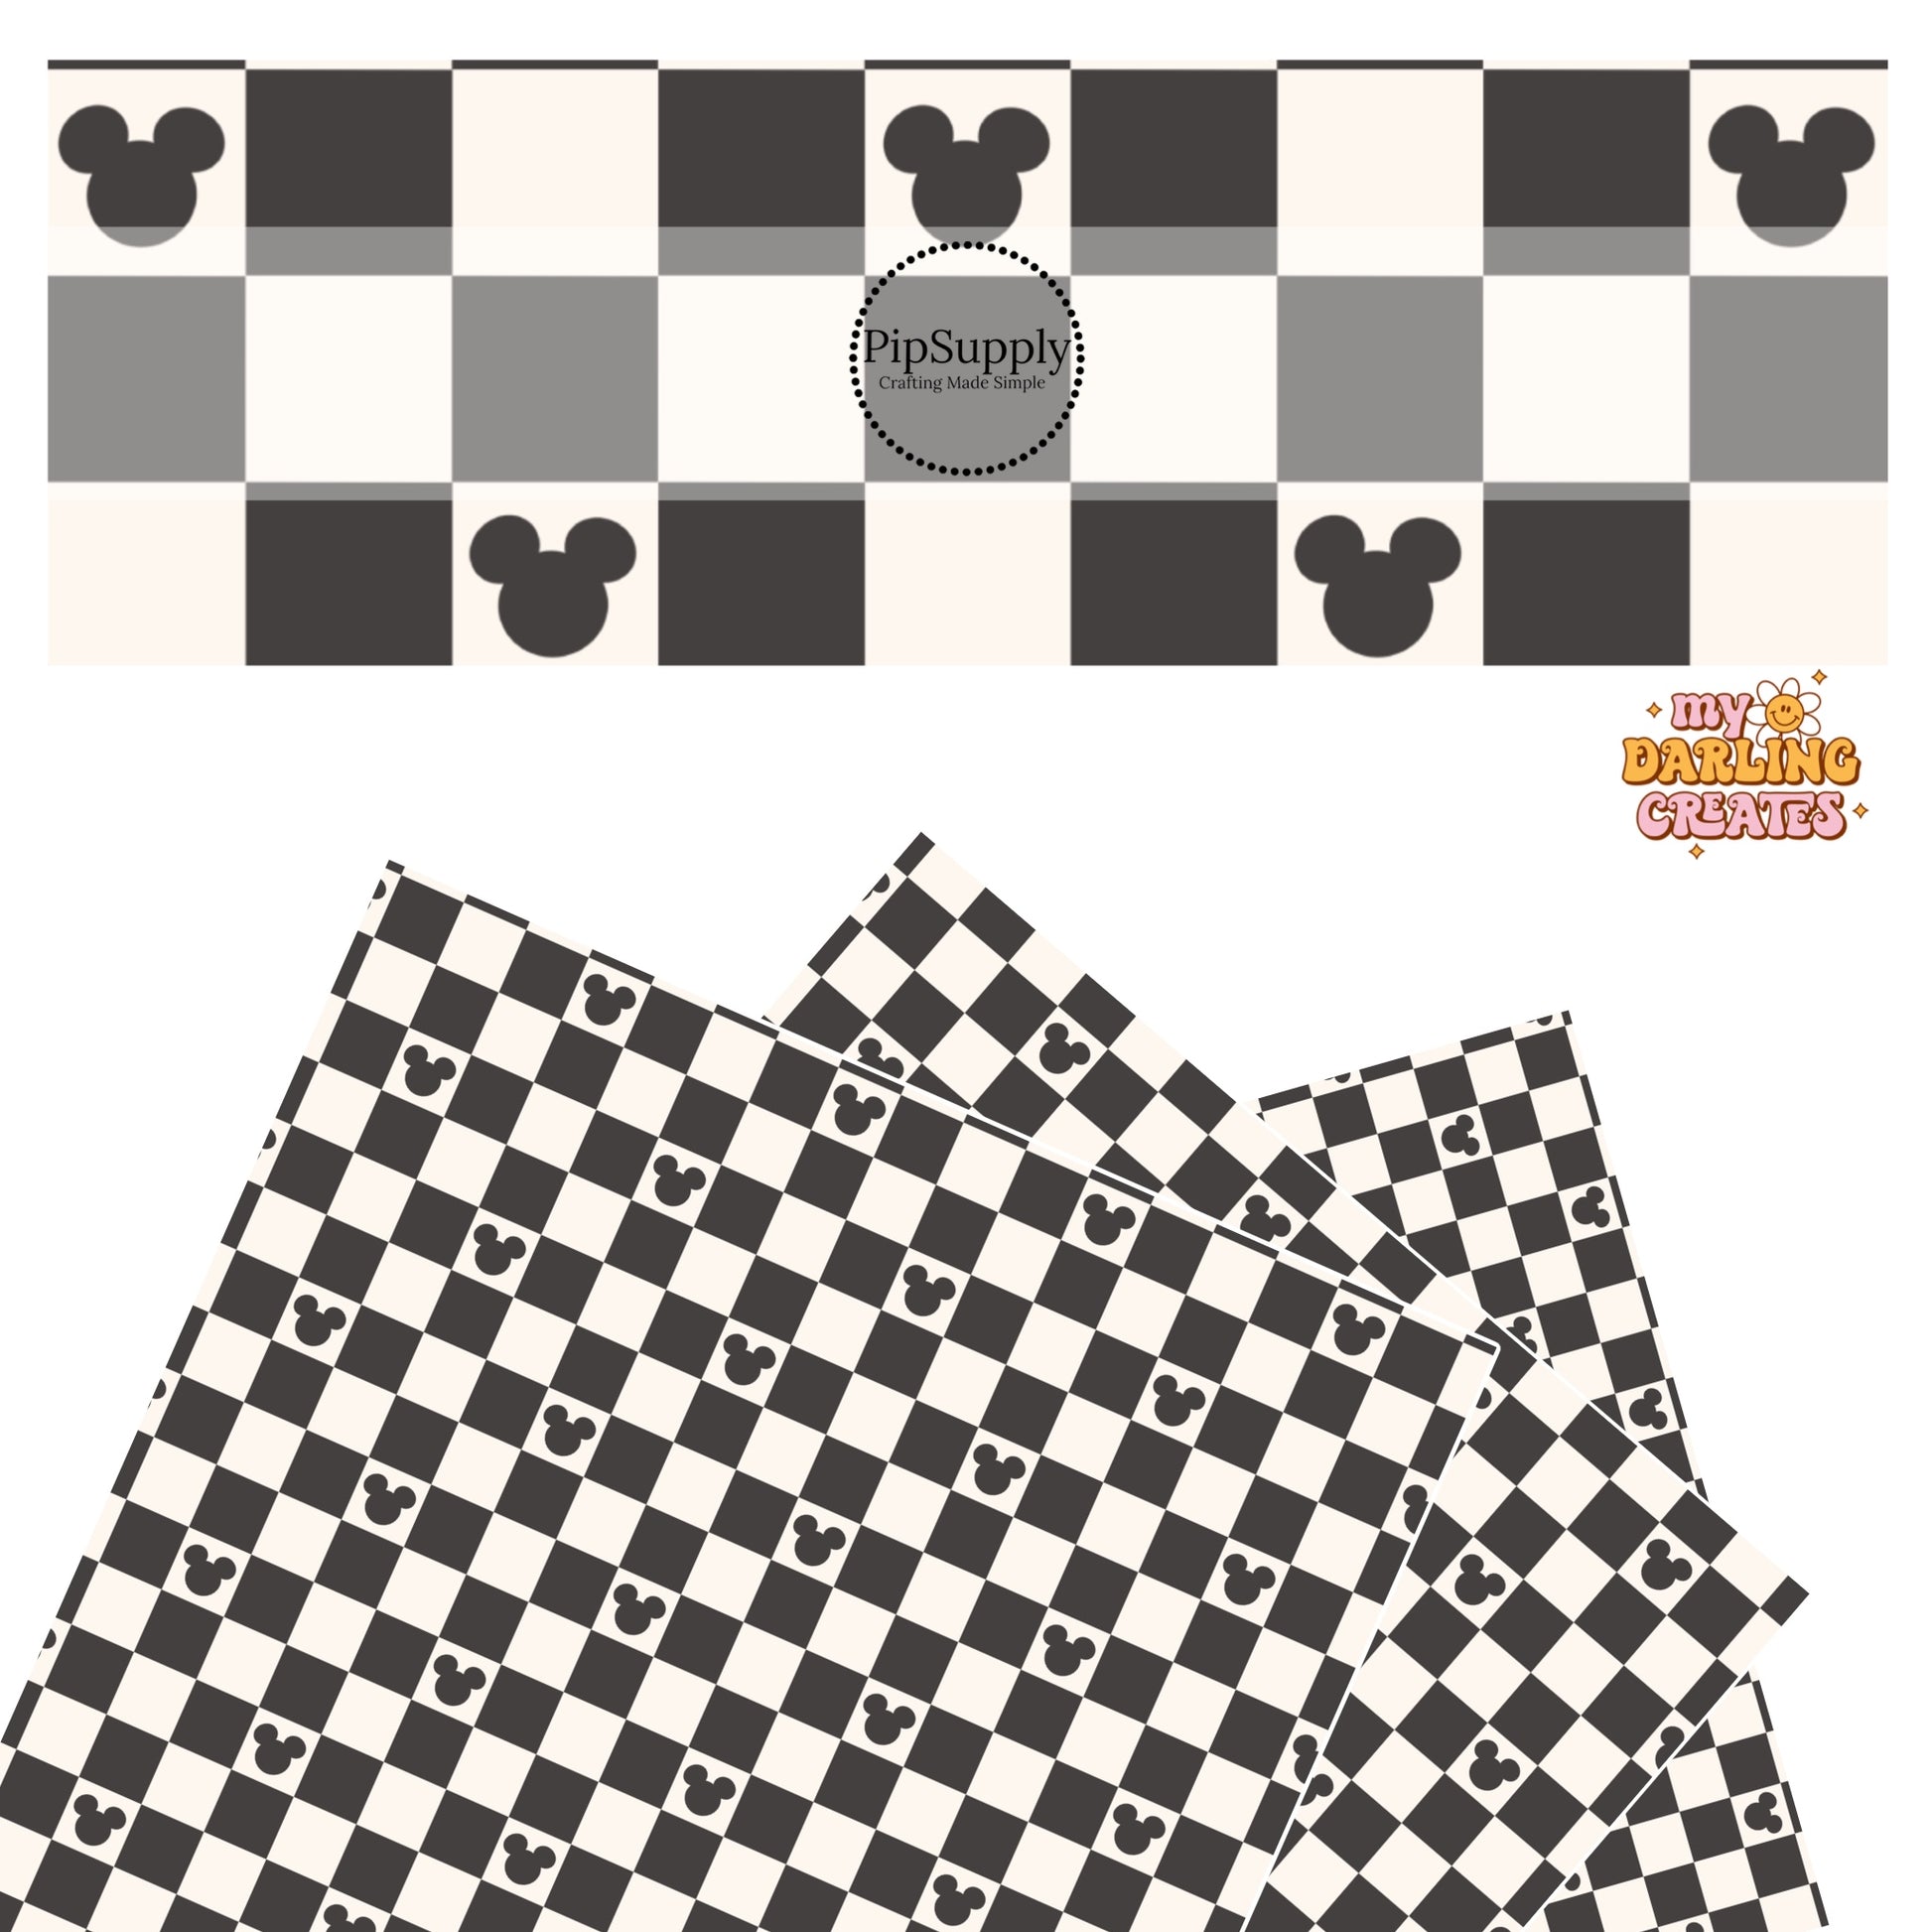 Black mouse on cream tiles with black checker faux leather sheets